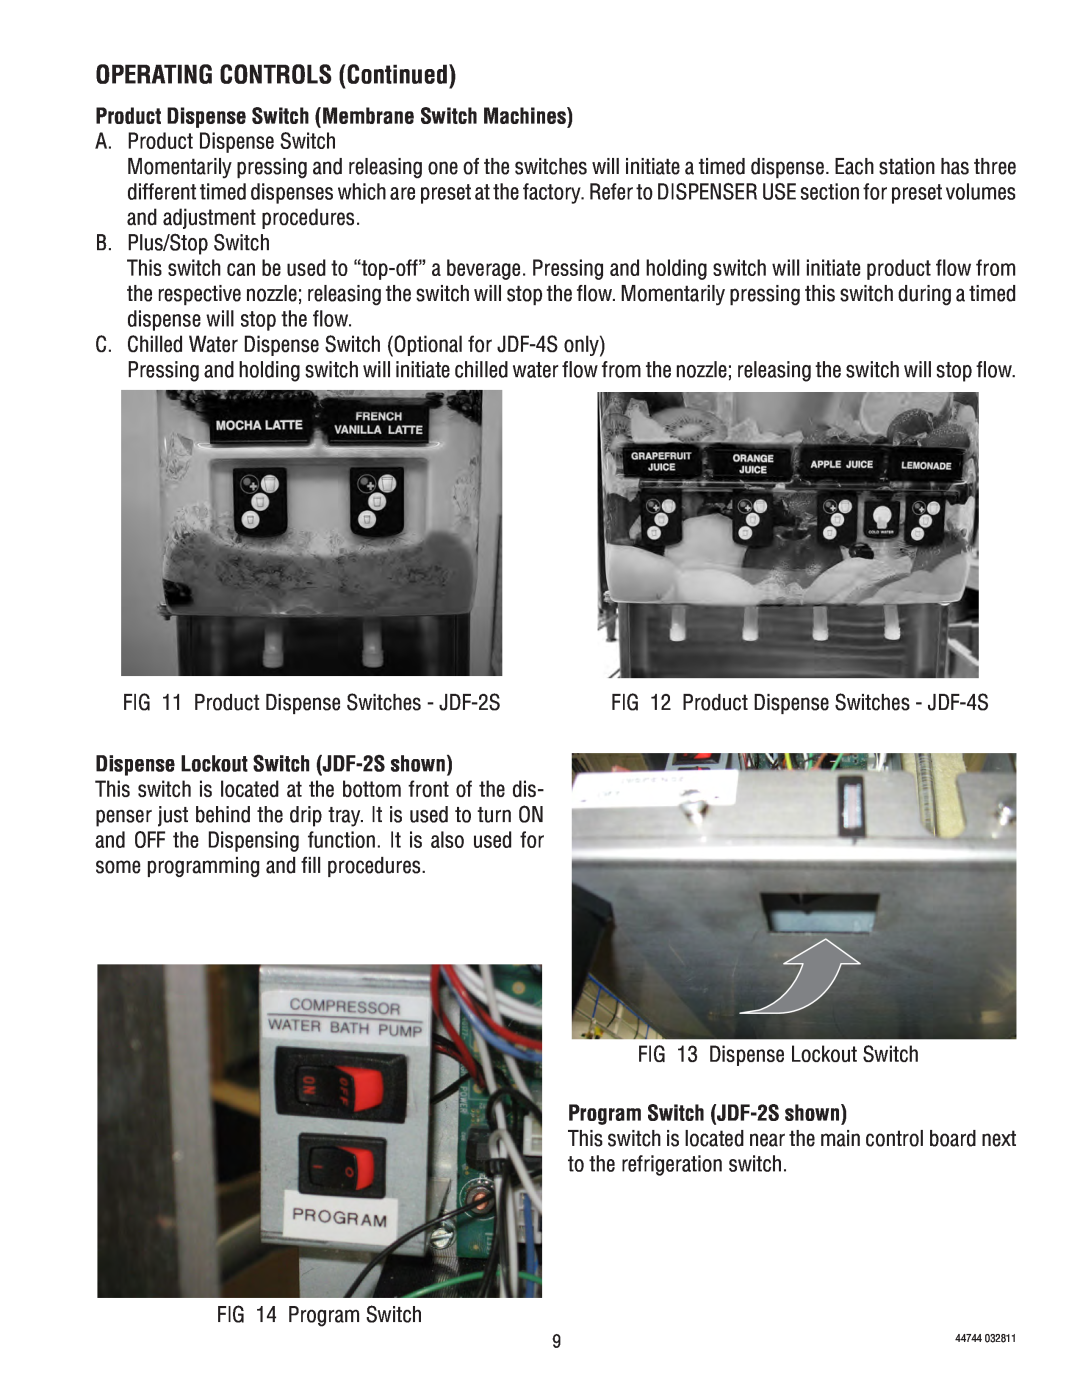 Bunn JDF-4S OPERATING CONTROLS Continued, Product Dispense Switch Membrane Switch Machines, Program Switch JDF-2S shown 